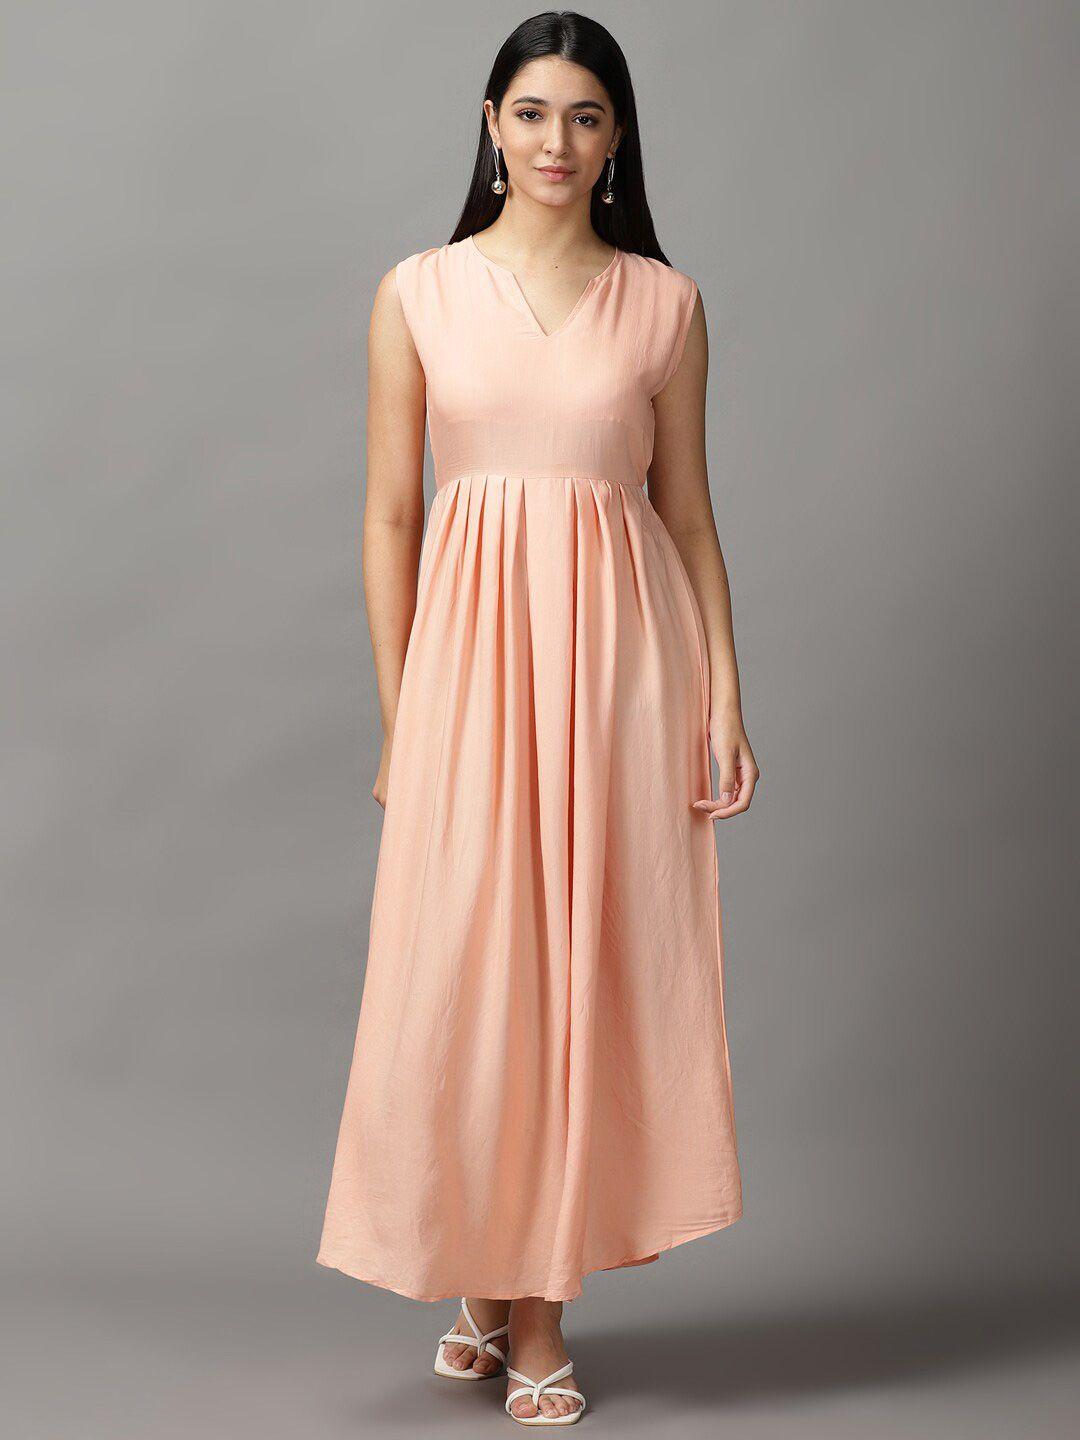 showoff-sleeveless-fit-and-flare-round-neck-maxi-dress